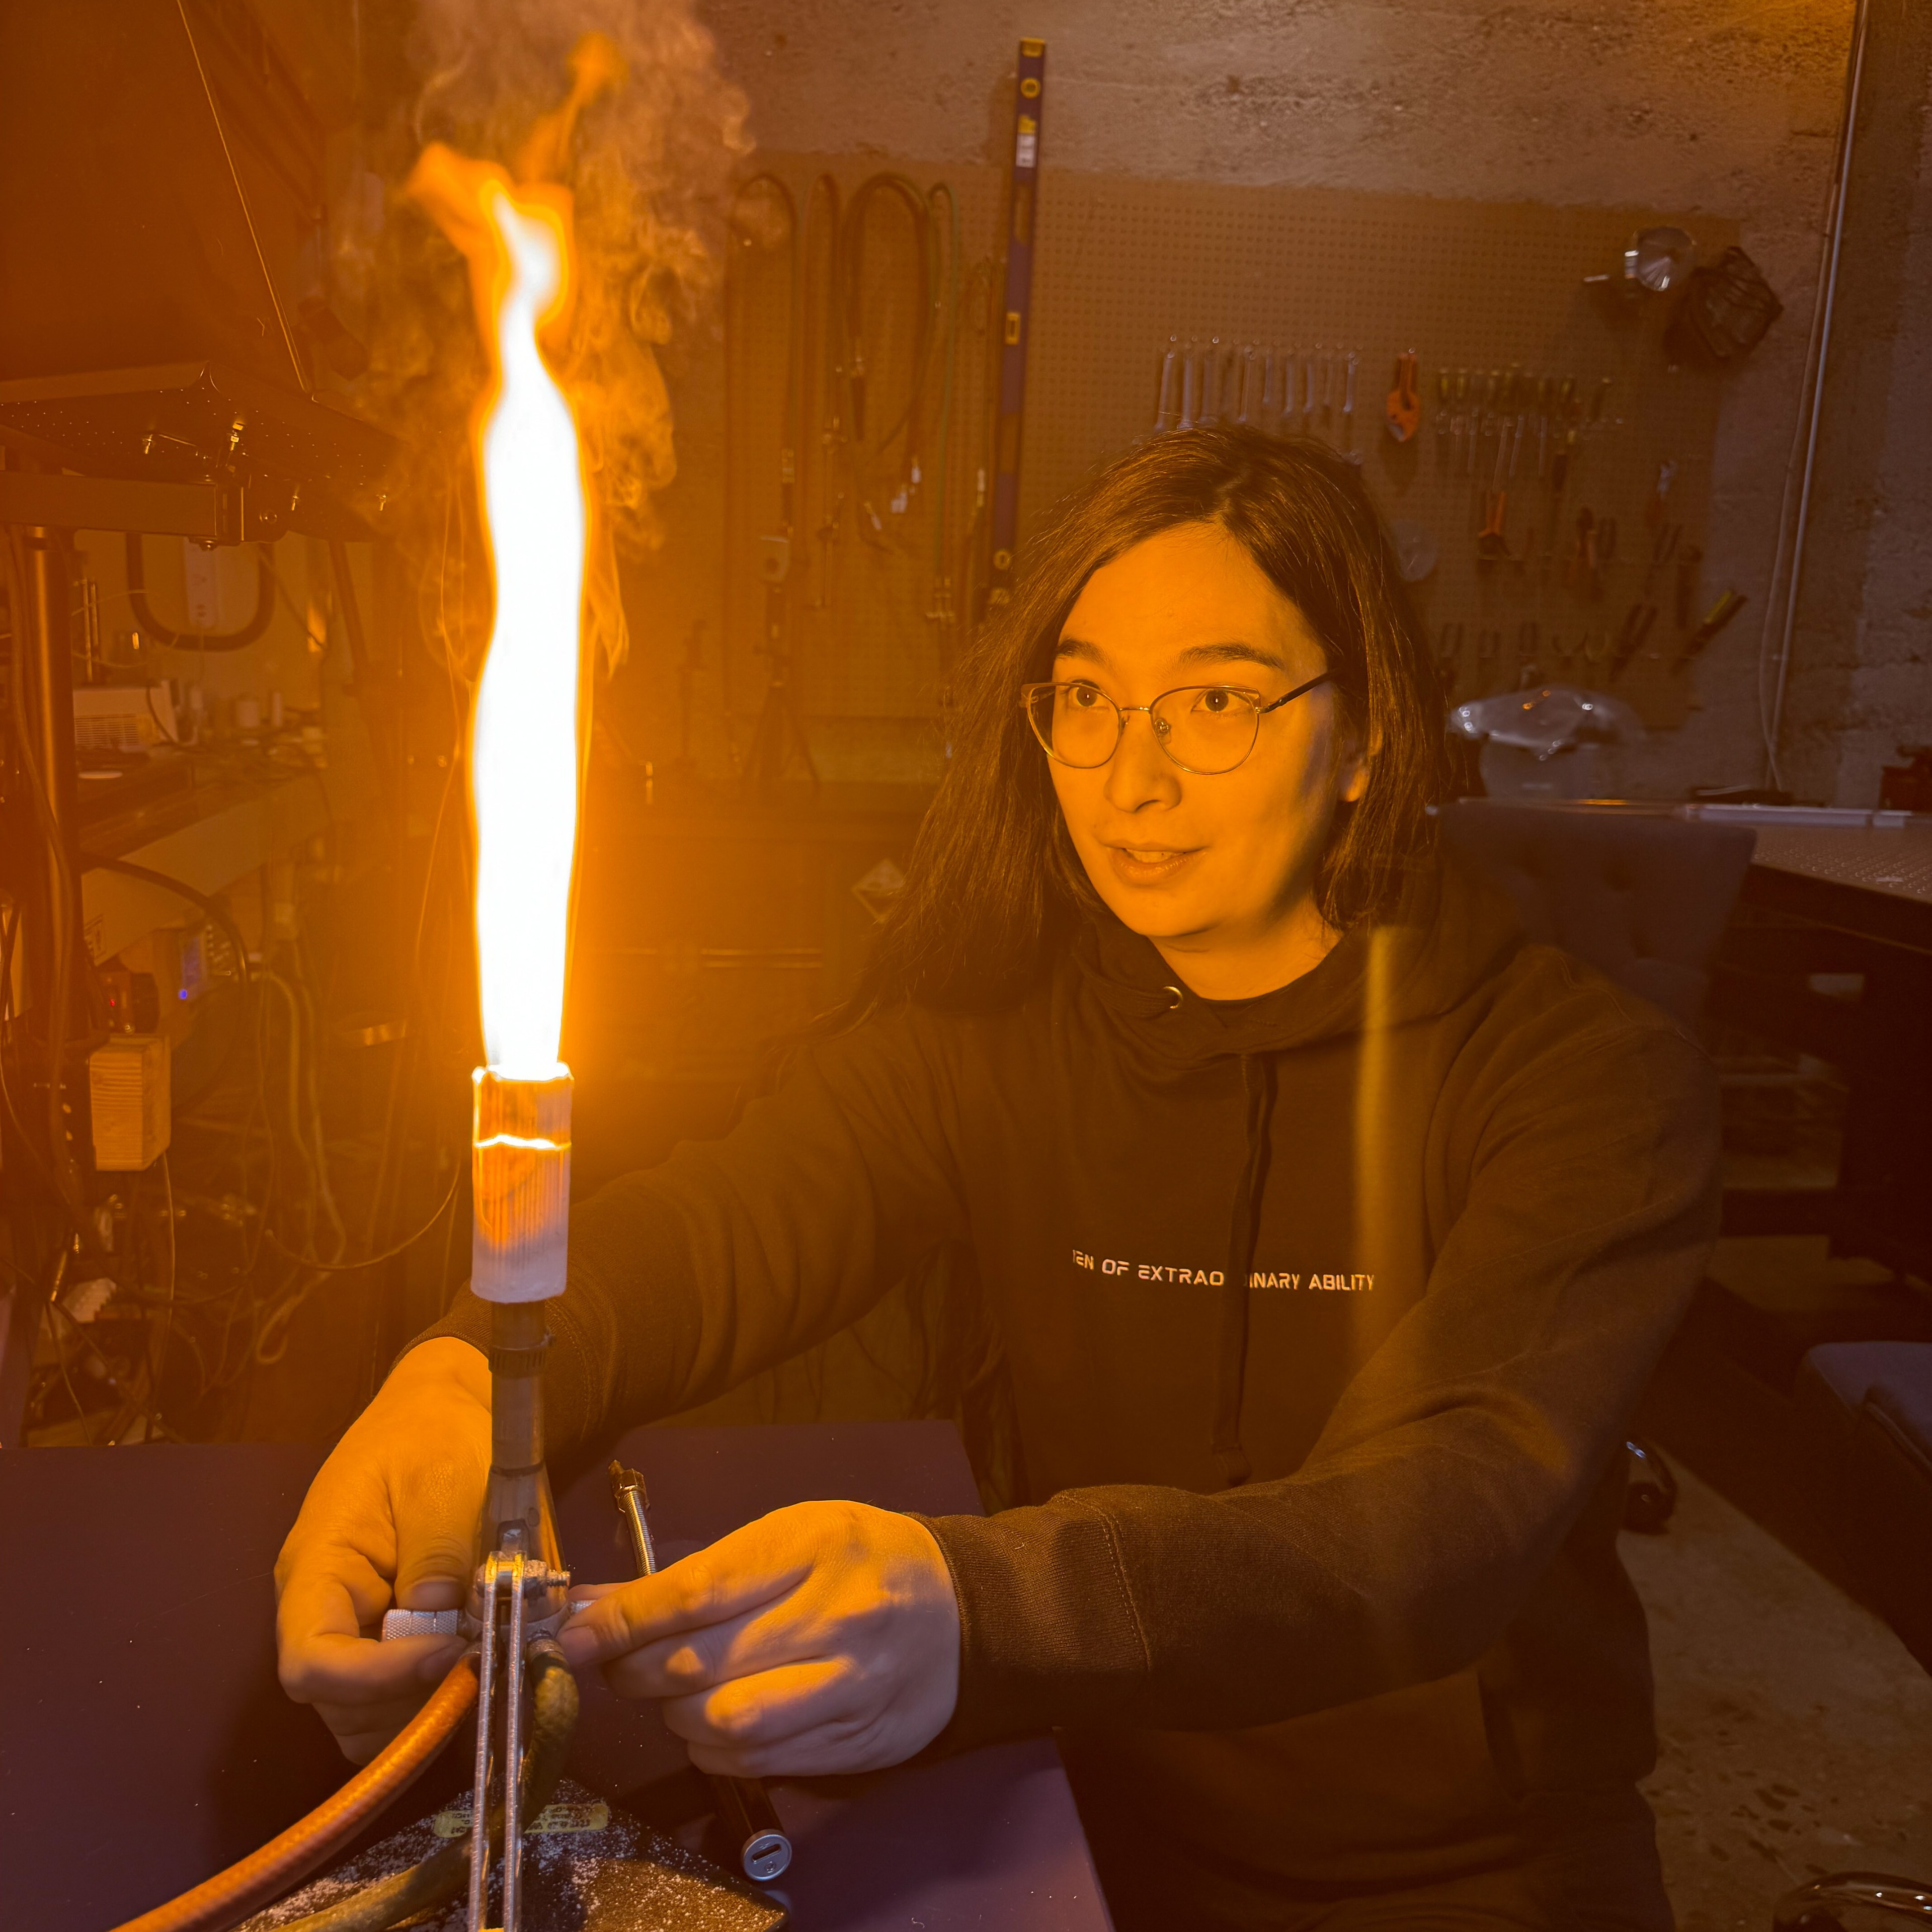 A person in glasses and a black hoodie adjusts a setup with a large, bright flame, appearing to conduct an experiment in a workshop with tools hanging on the wall.